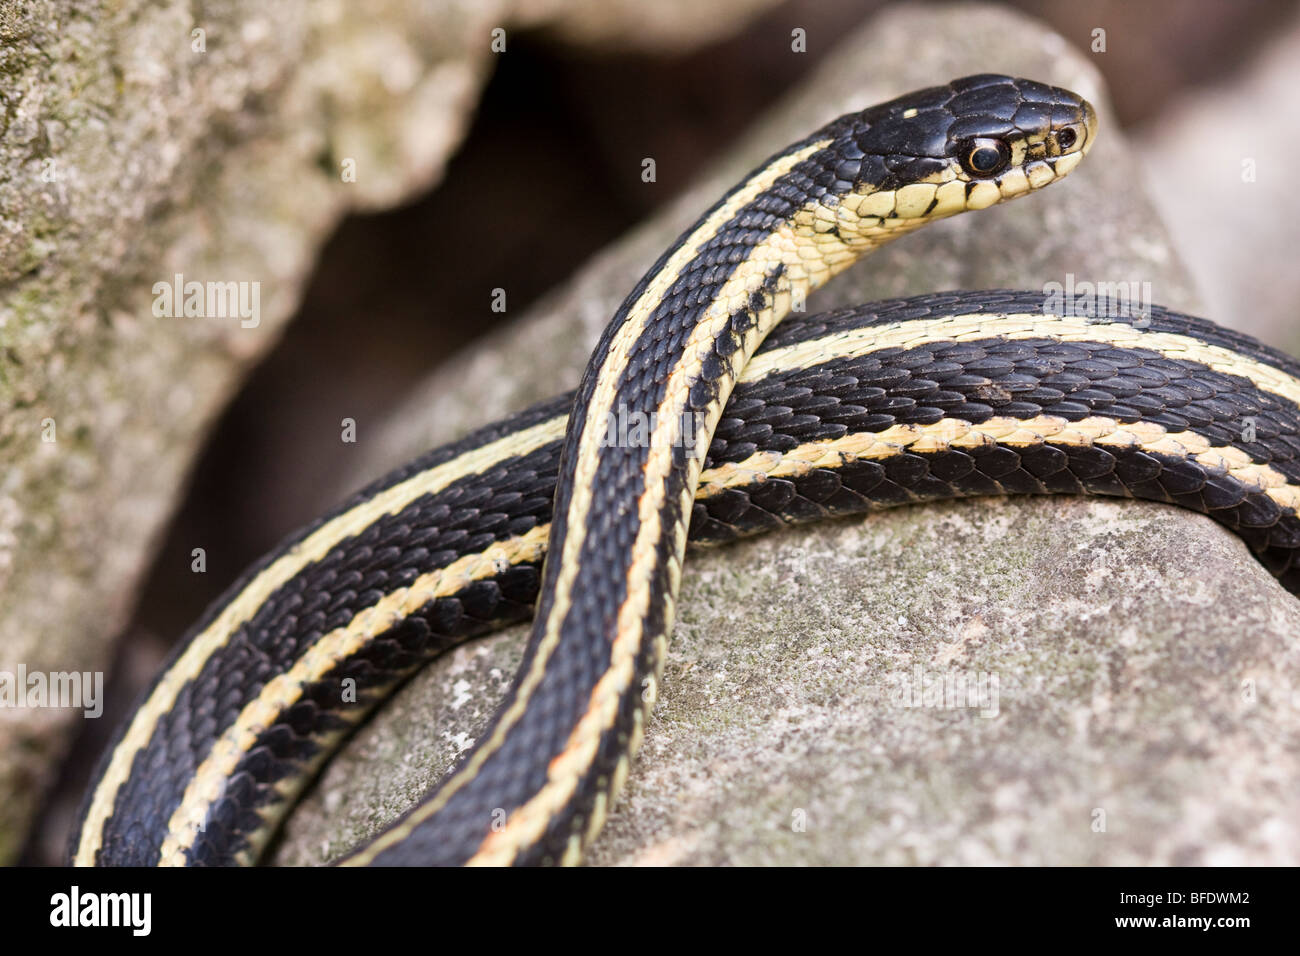 Close-up of Red-sided garter snake (Thamnophis)  at Narcisse Snake Dens in Winnipeg, Manitoba, Canada Stock Photo